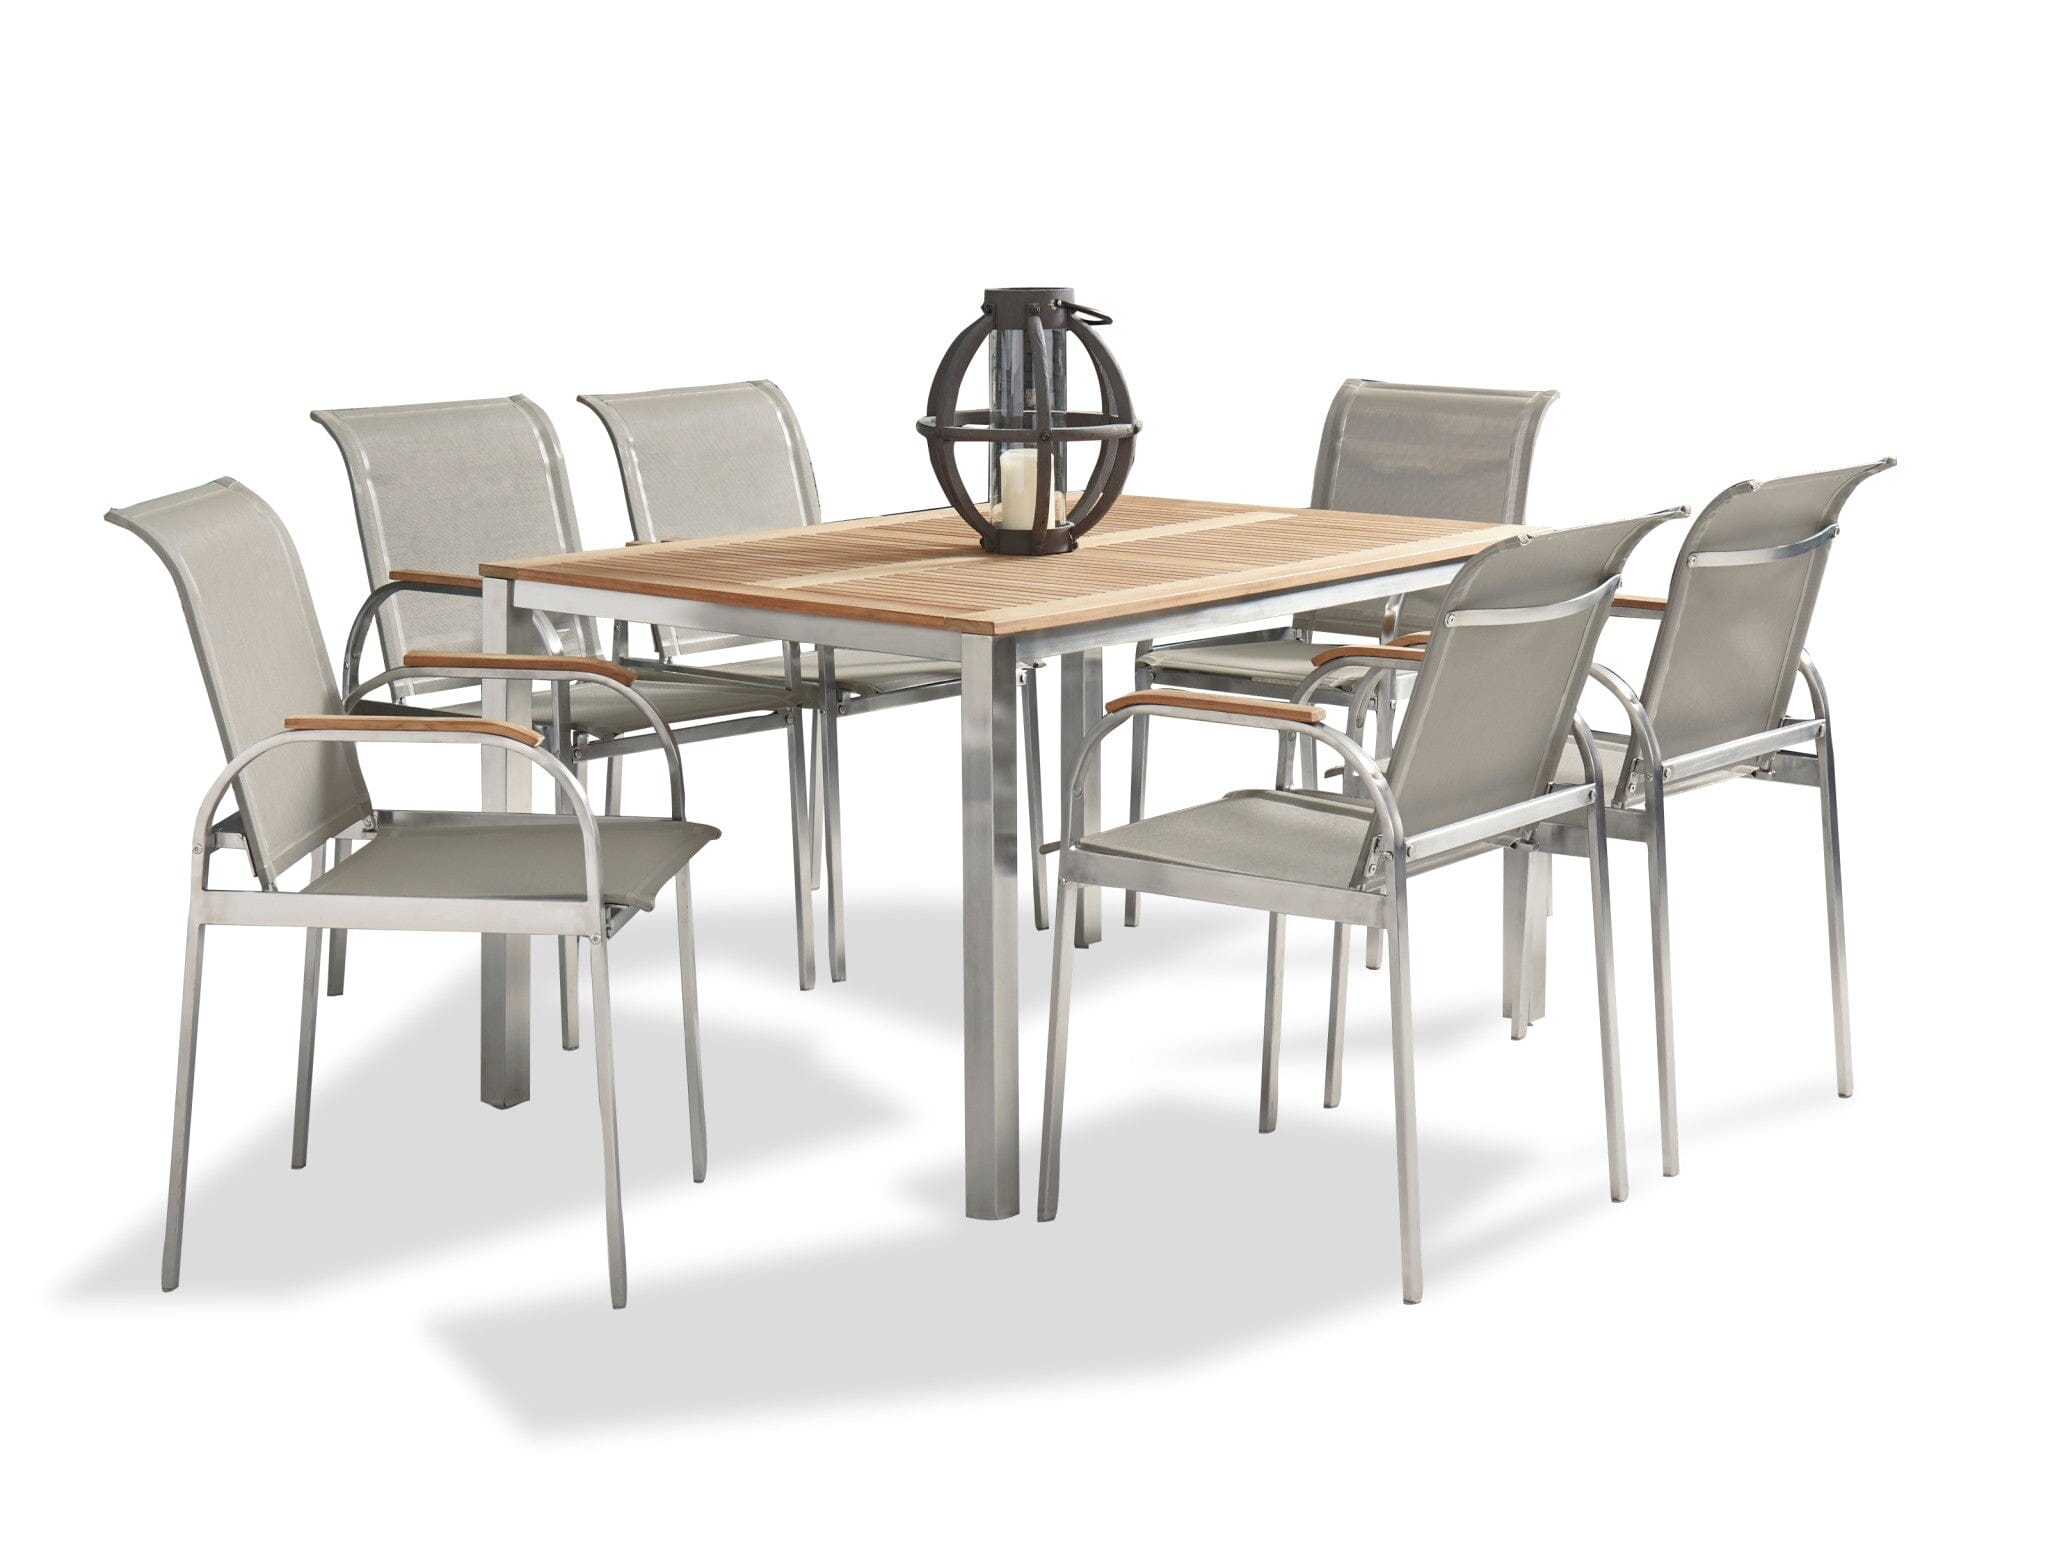 Traditional 7 Piece Outdoor Dining Set By Aruba Outdoor Dining Set Aruba